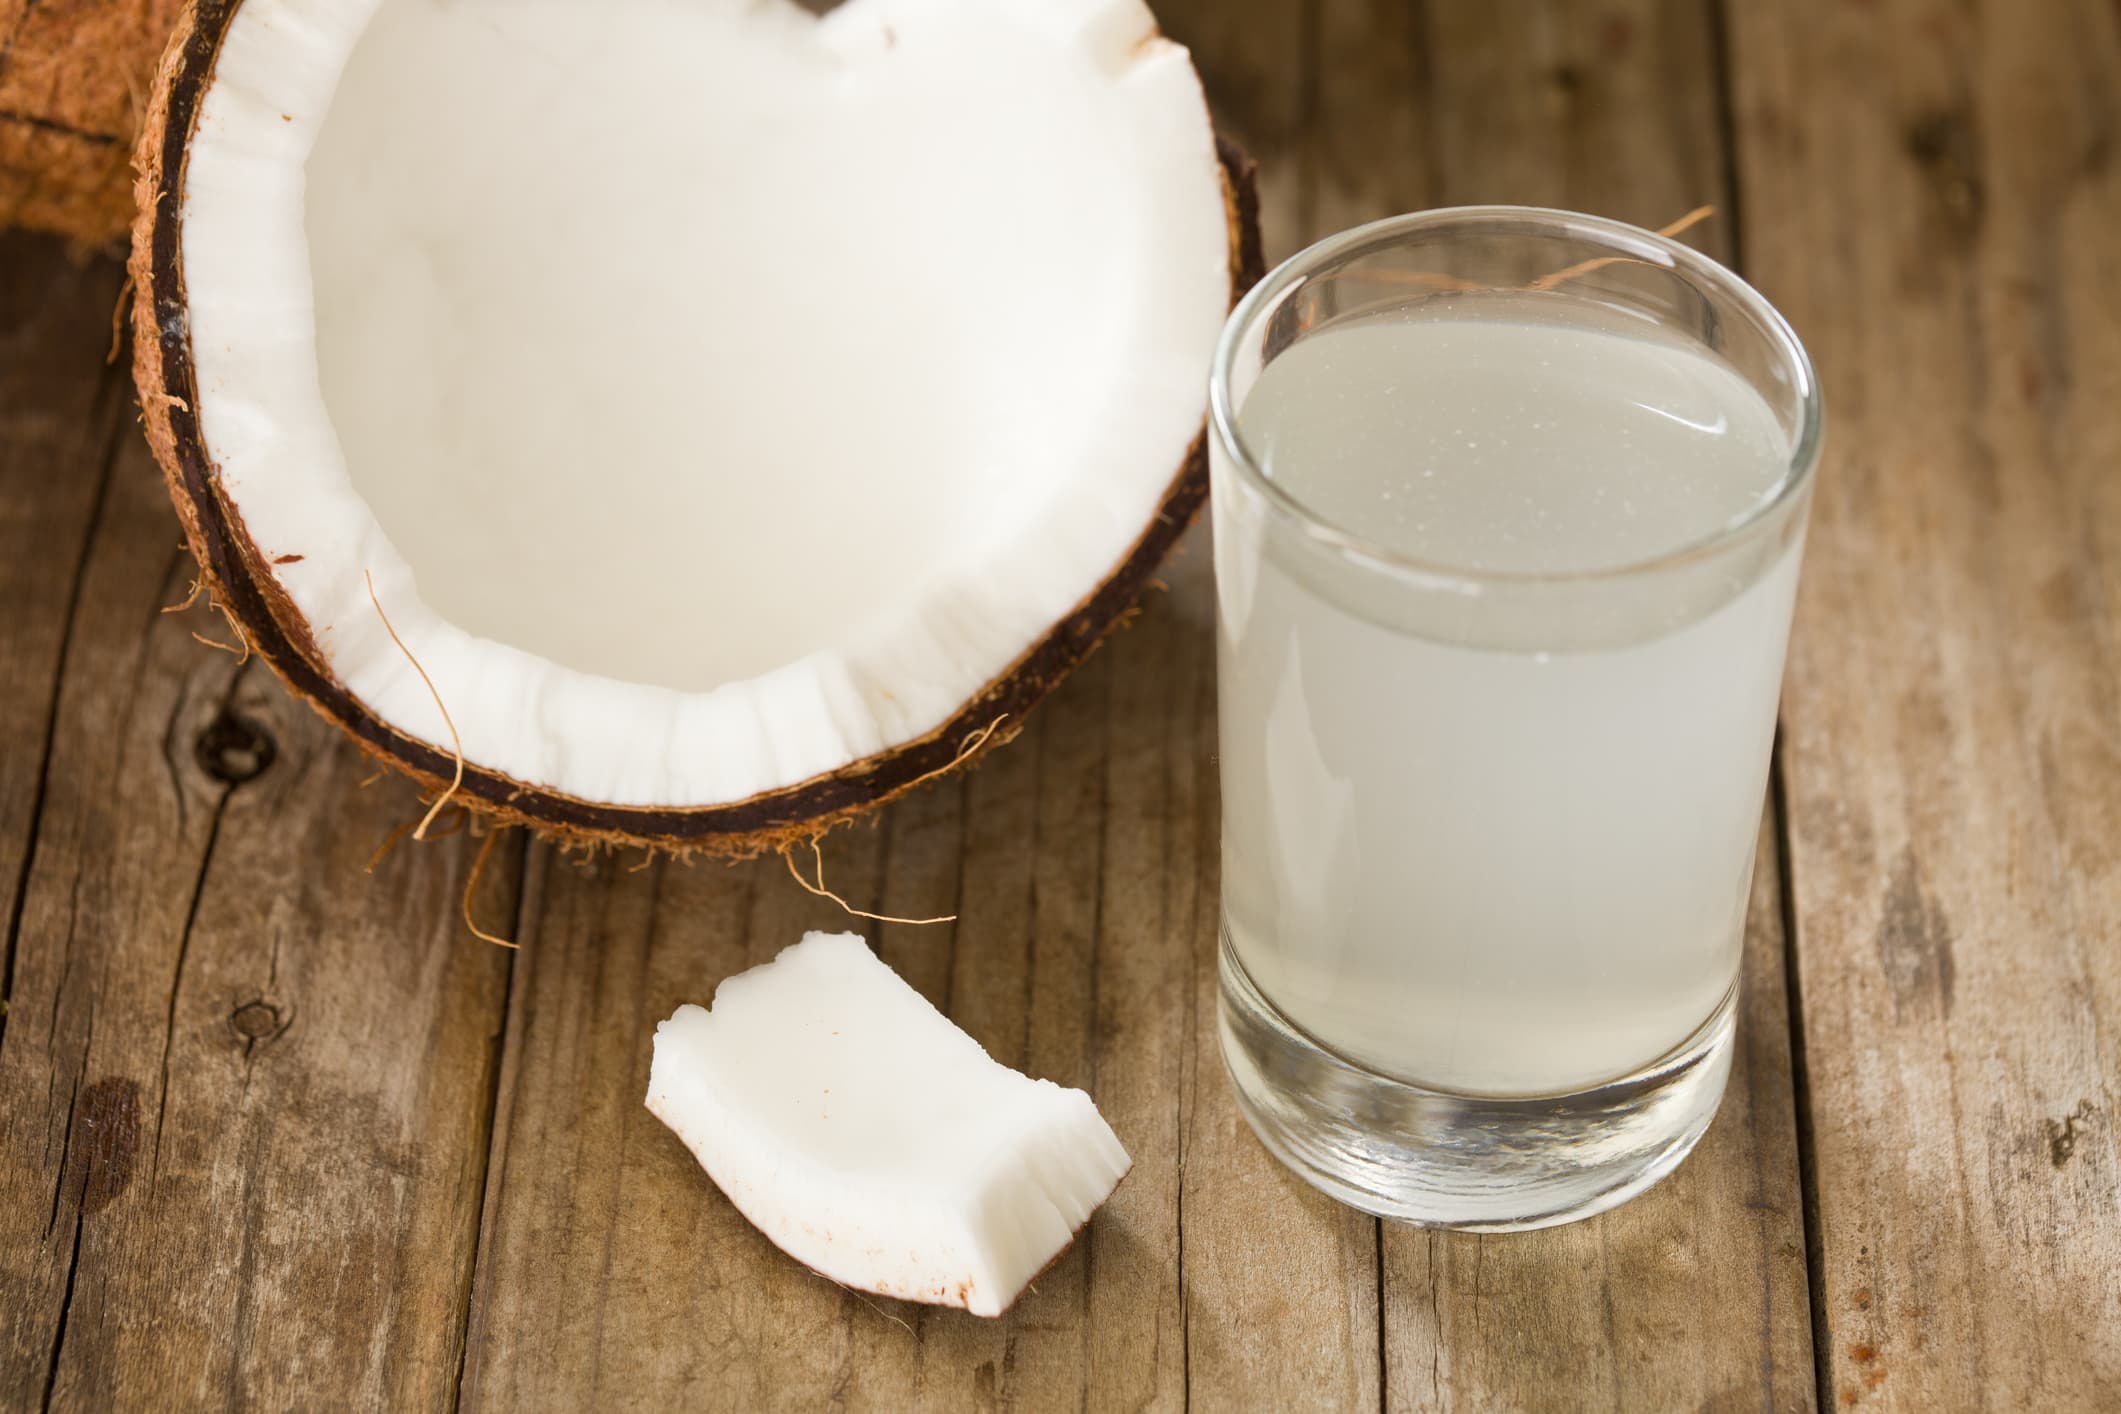 "A high angle close up of half a coconut and a tumbler full of coconut water, coconut water is said to be rich in potassium and antioxidants."